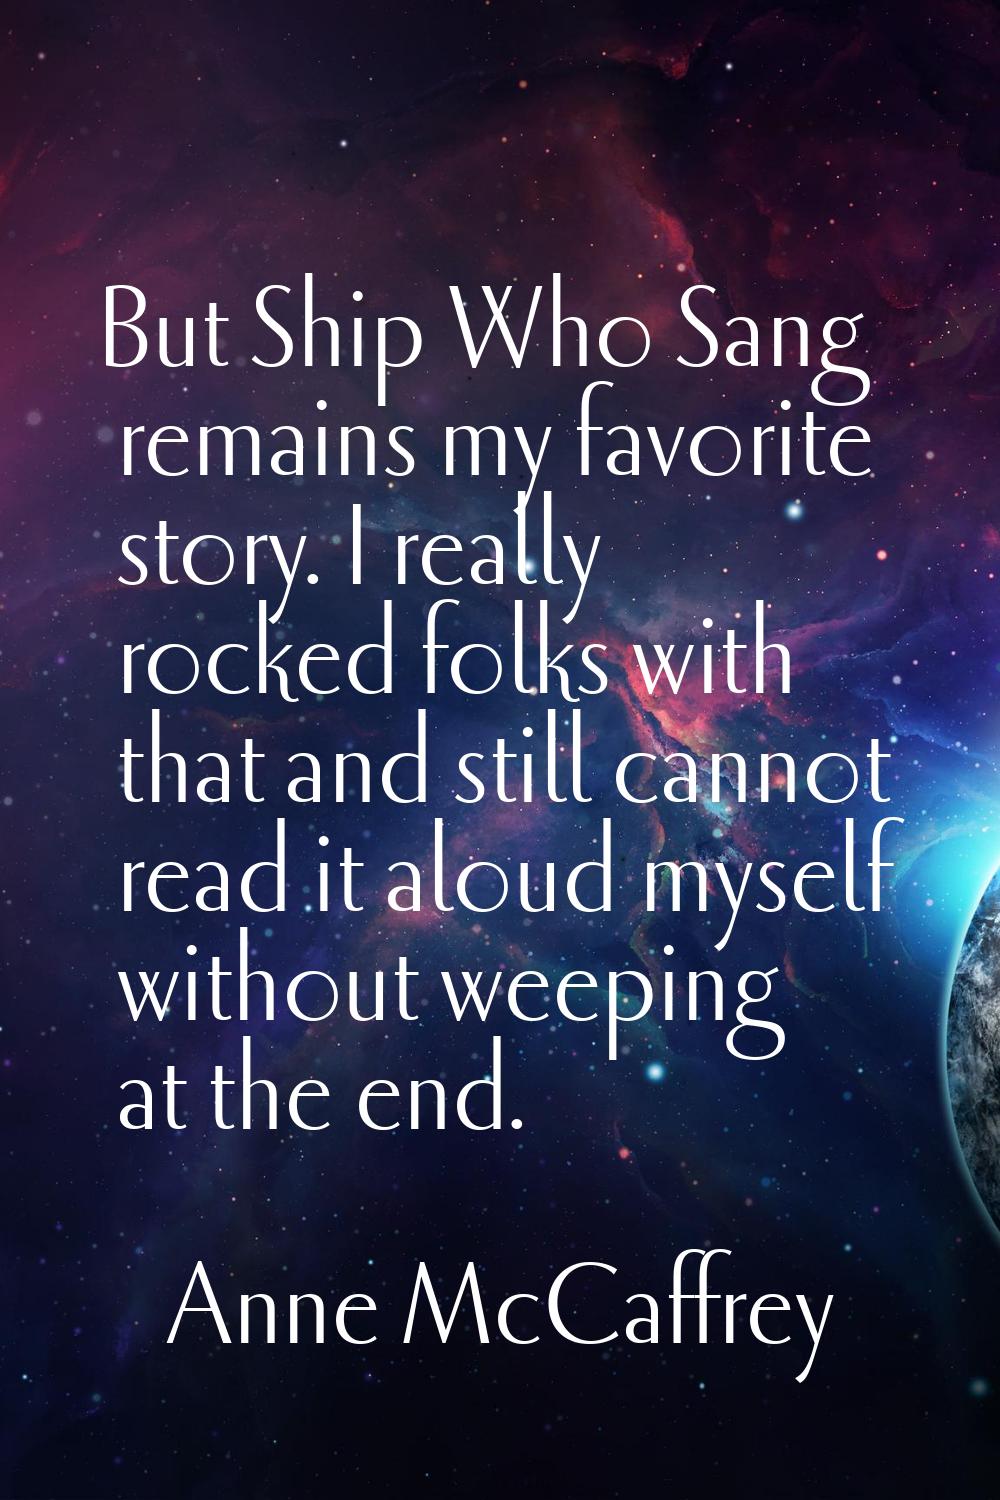 But Ship Who Sang remains my favorite story. I really rocked folks with that and still cannot read 